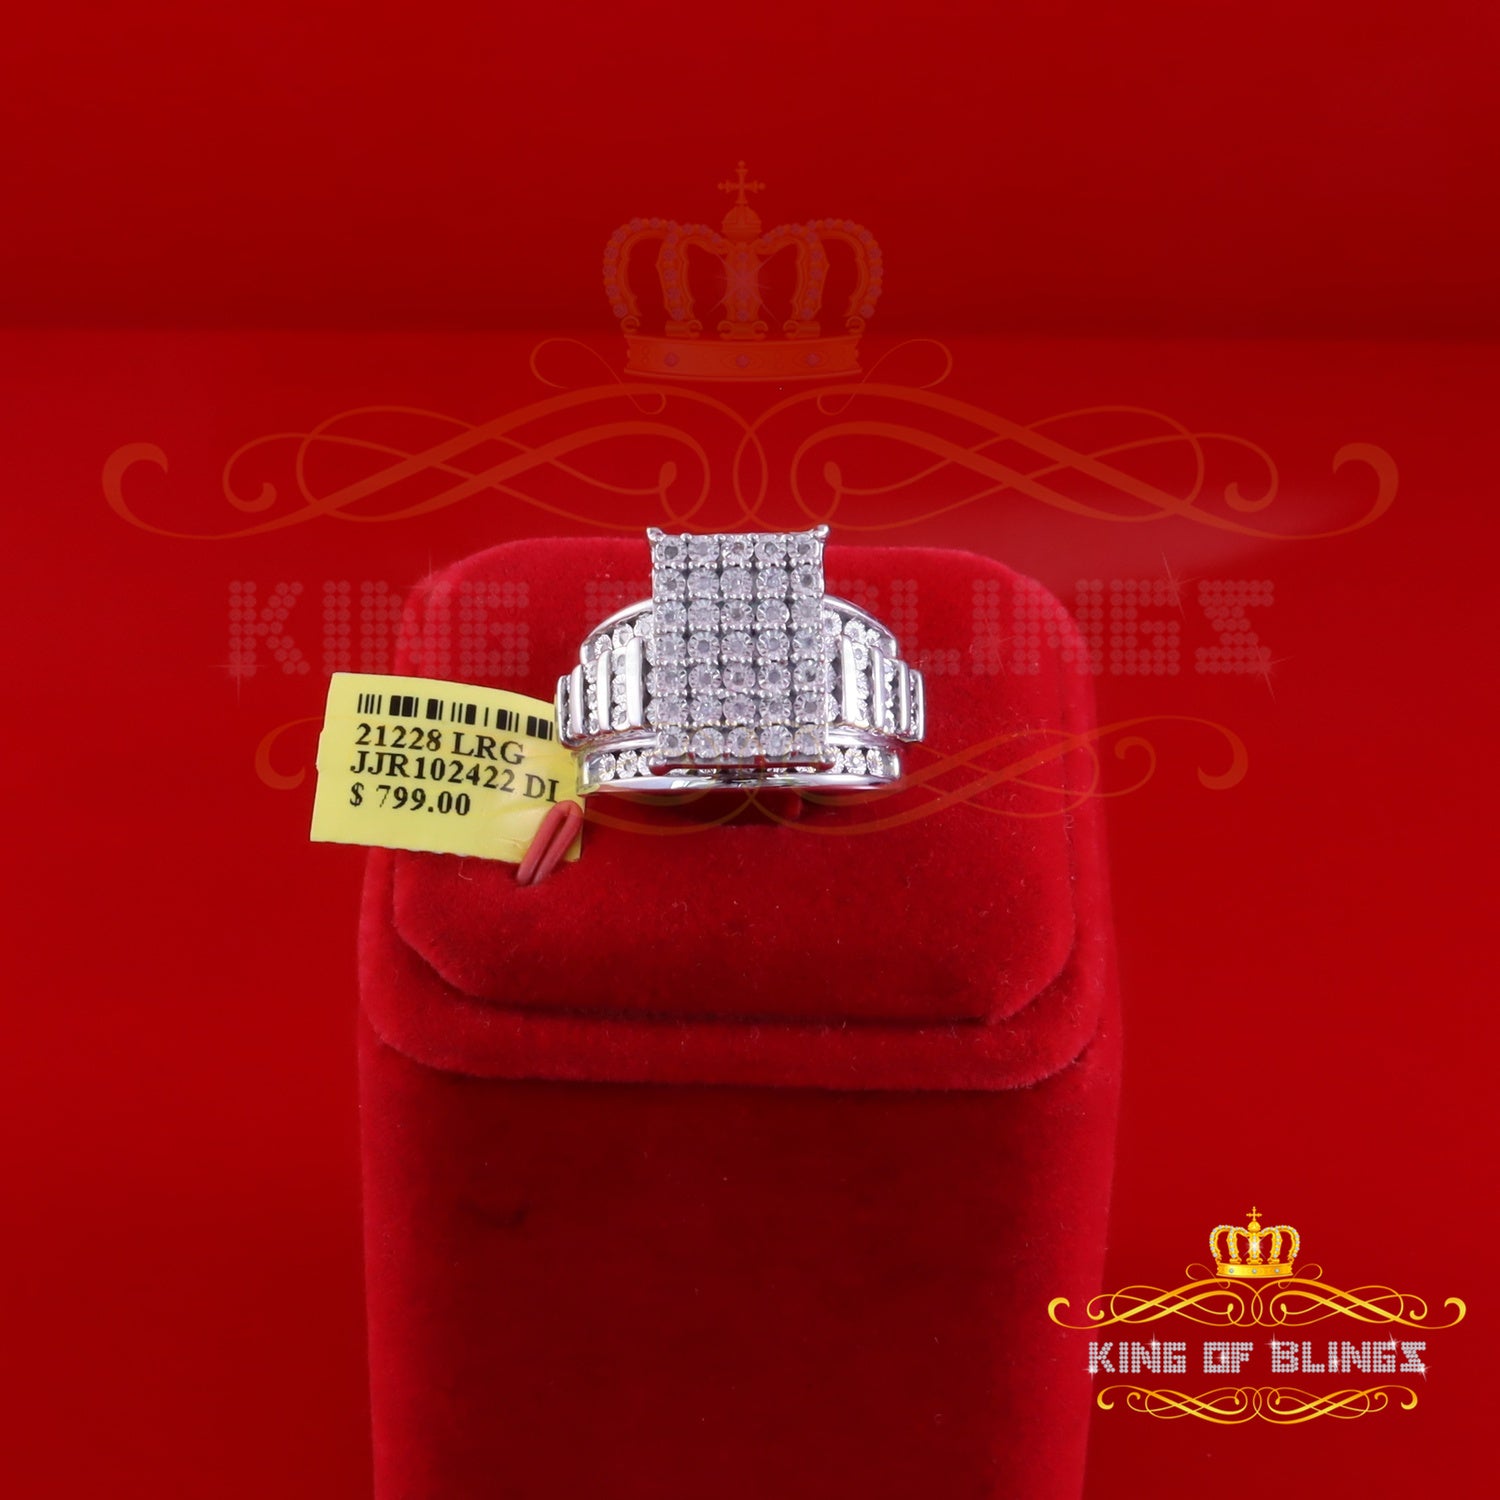 King Of Bling's White Cinderella Rectangle Real 0.25ct Diamond 925 Silver Womens Ring Size 7 KING OF BLINGS